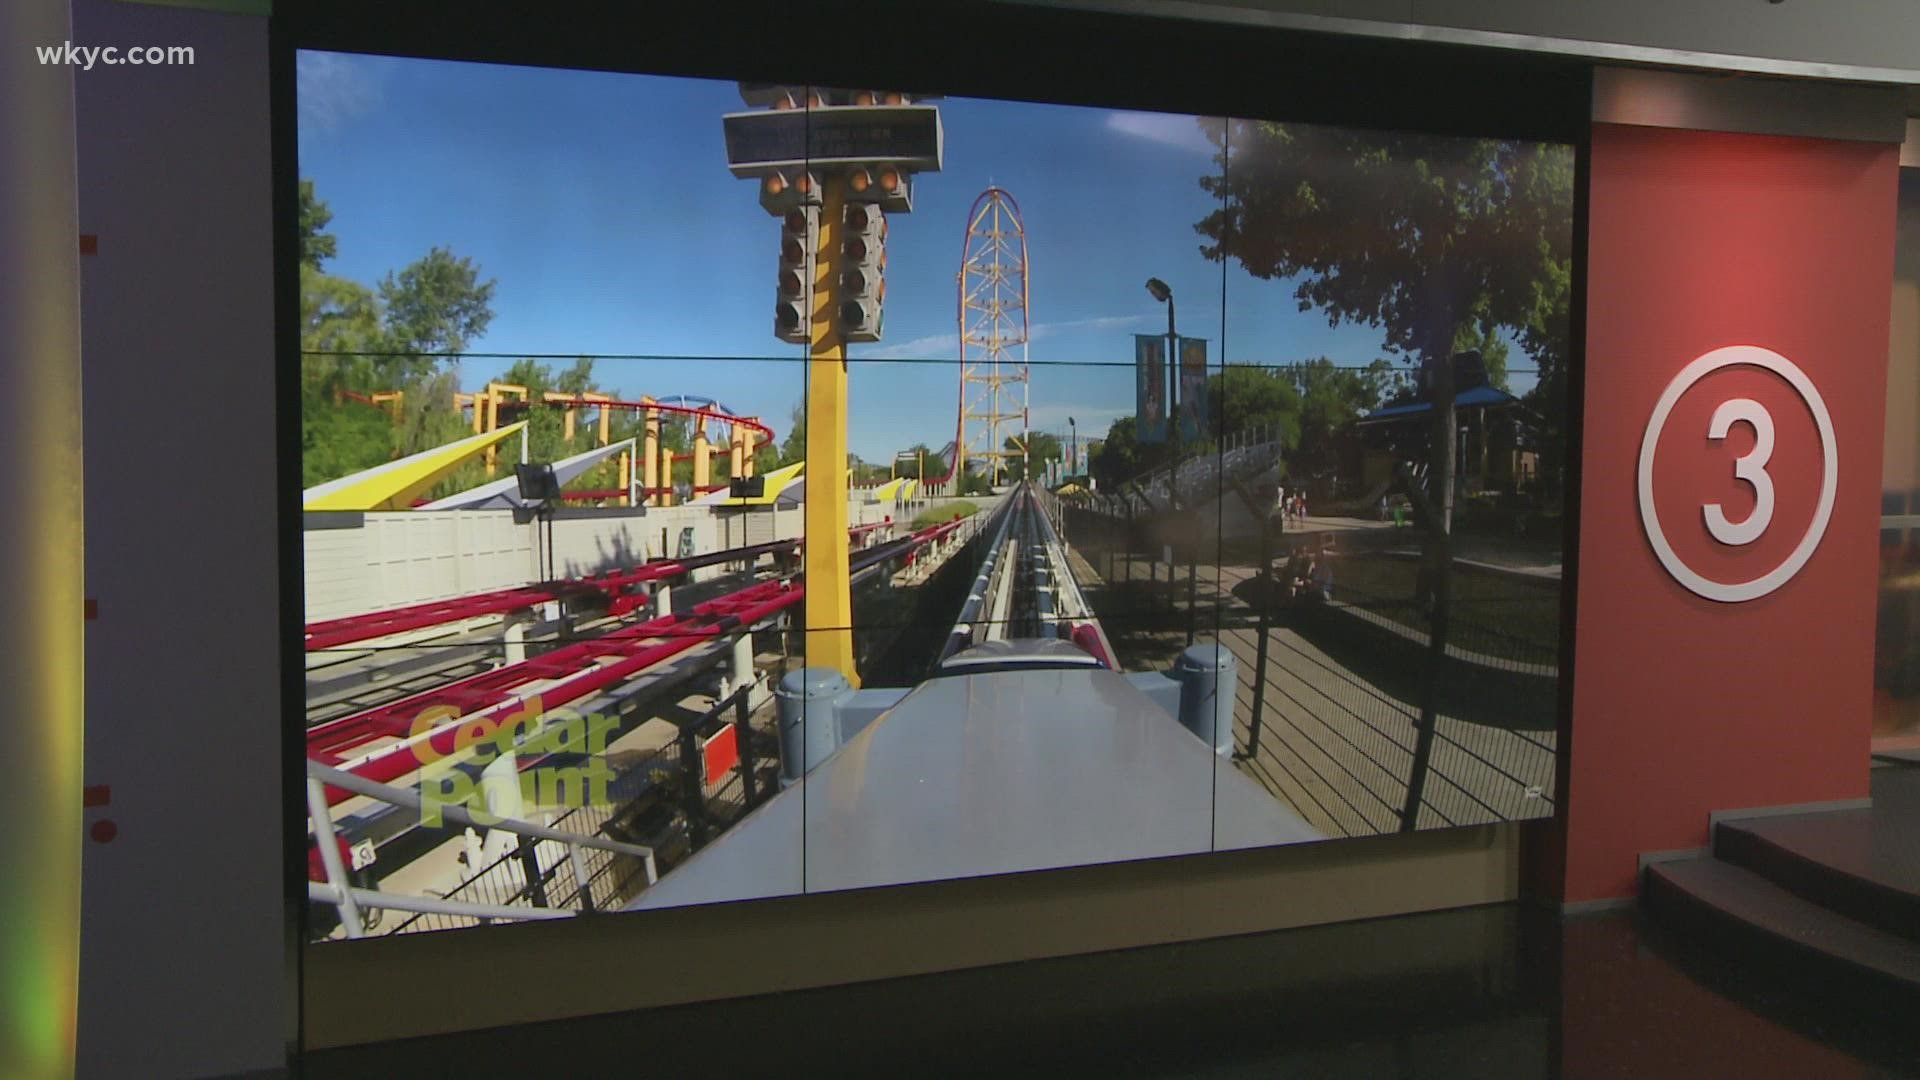 Cedar Point officials say a "female guest" was taken to the hospital after a small metal object fell from Top Thrill Dragster. This is a developing story.